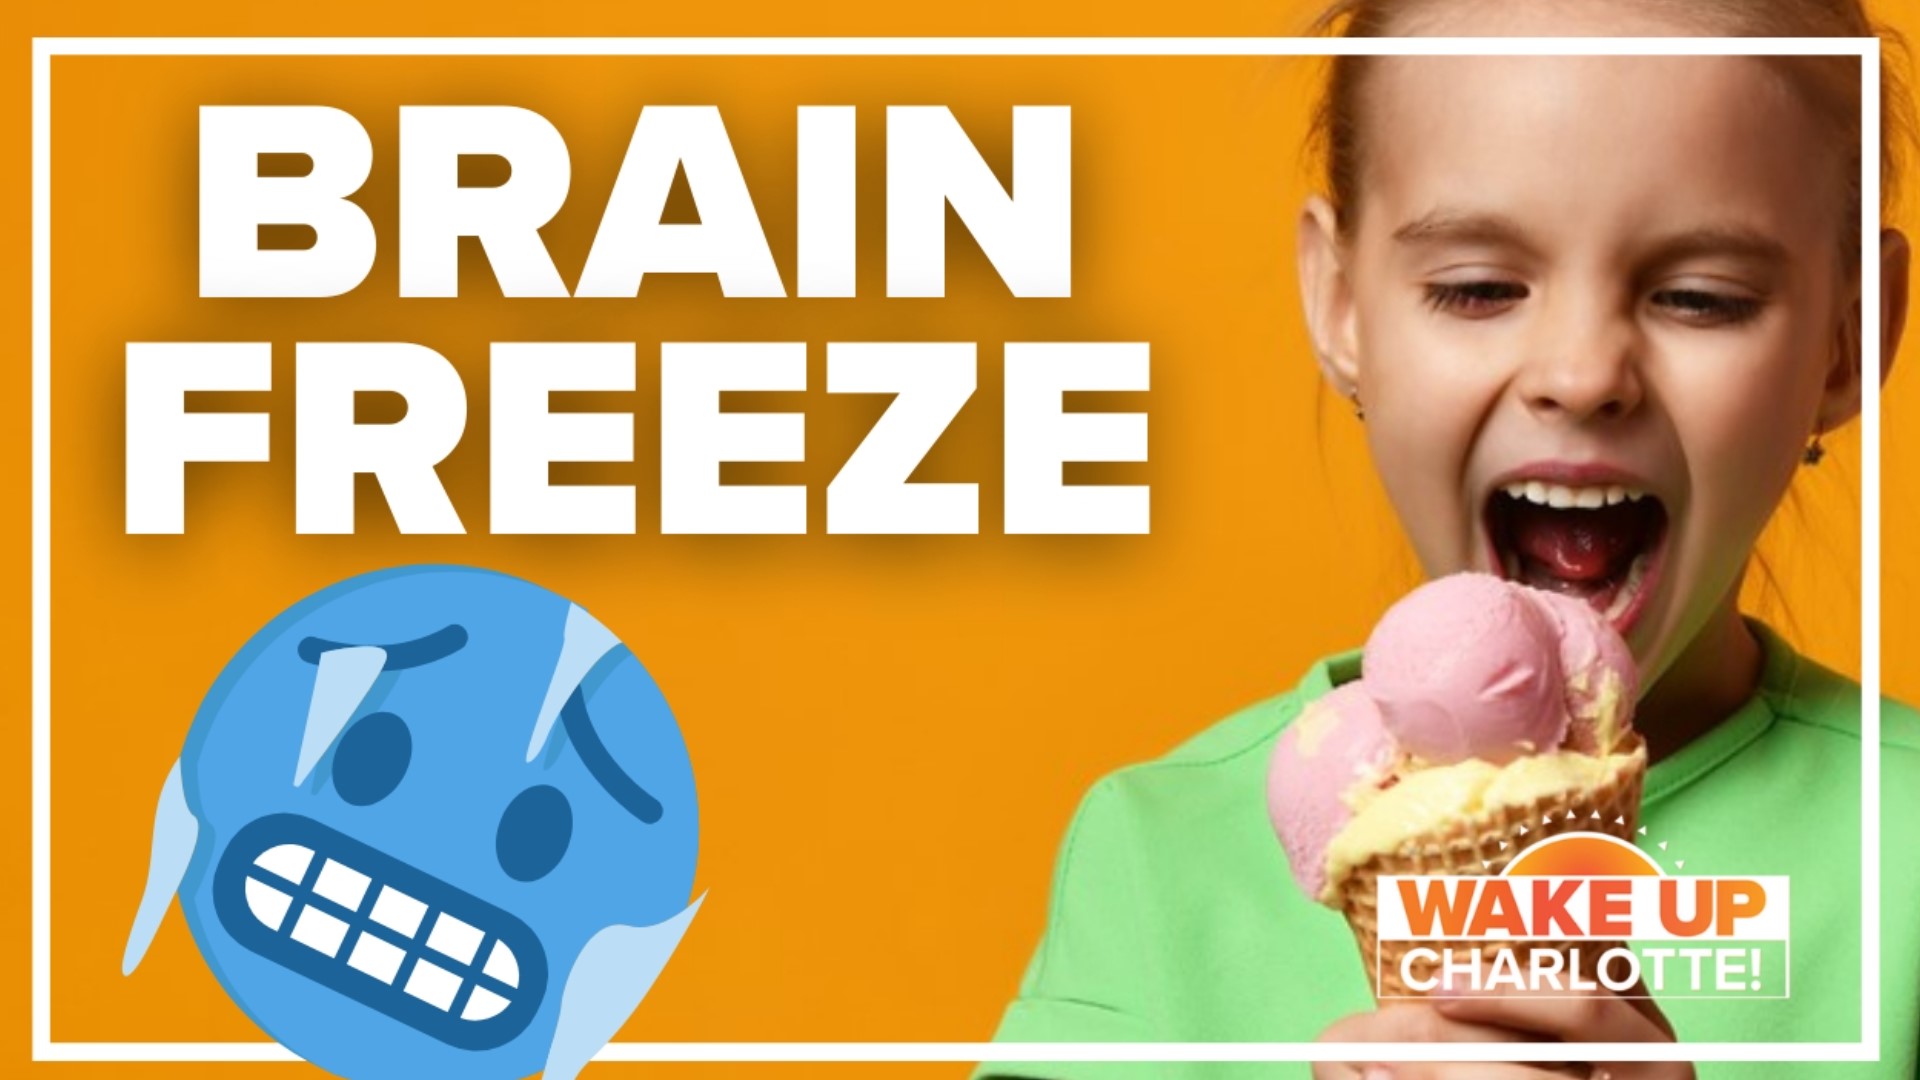 Your brain doesn't technically freeze, but changing the body temperature quickly can cause some pain.